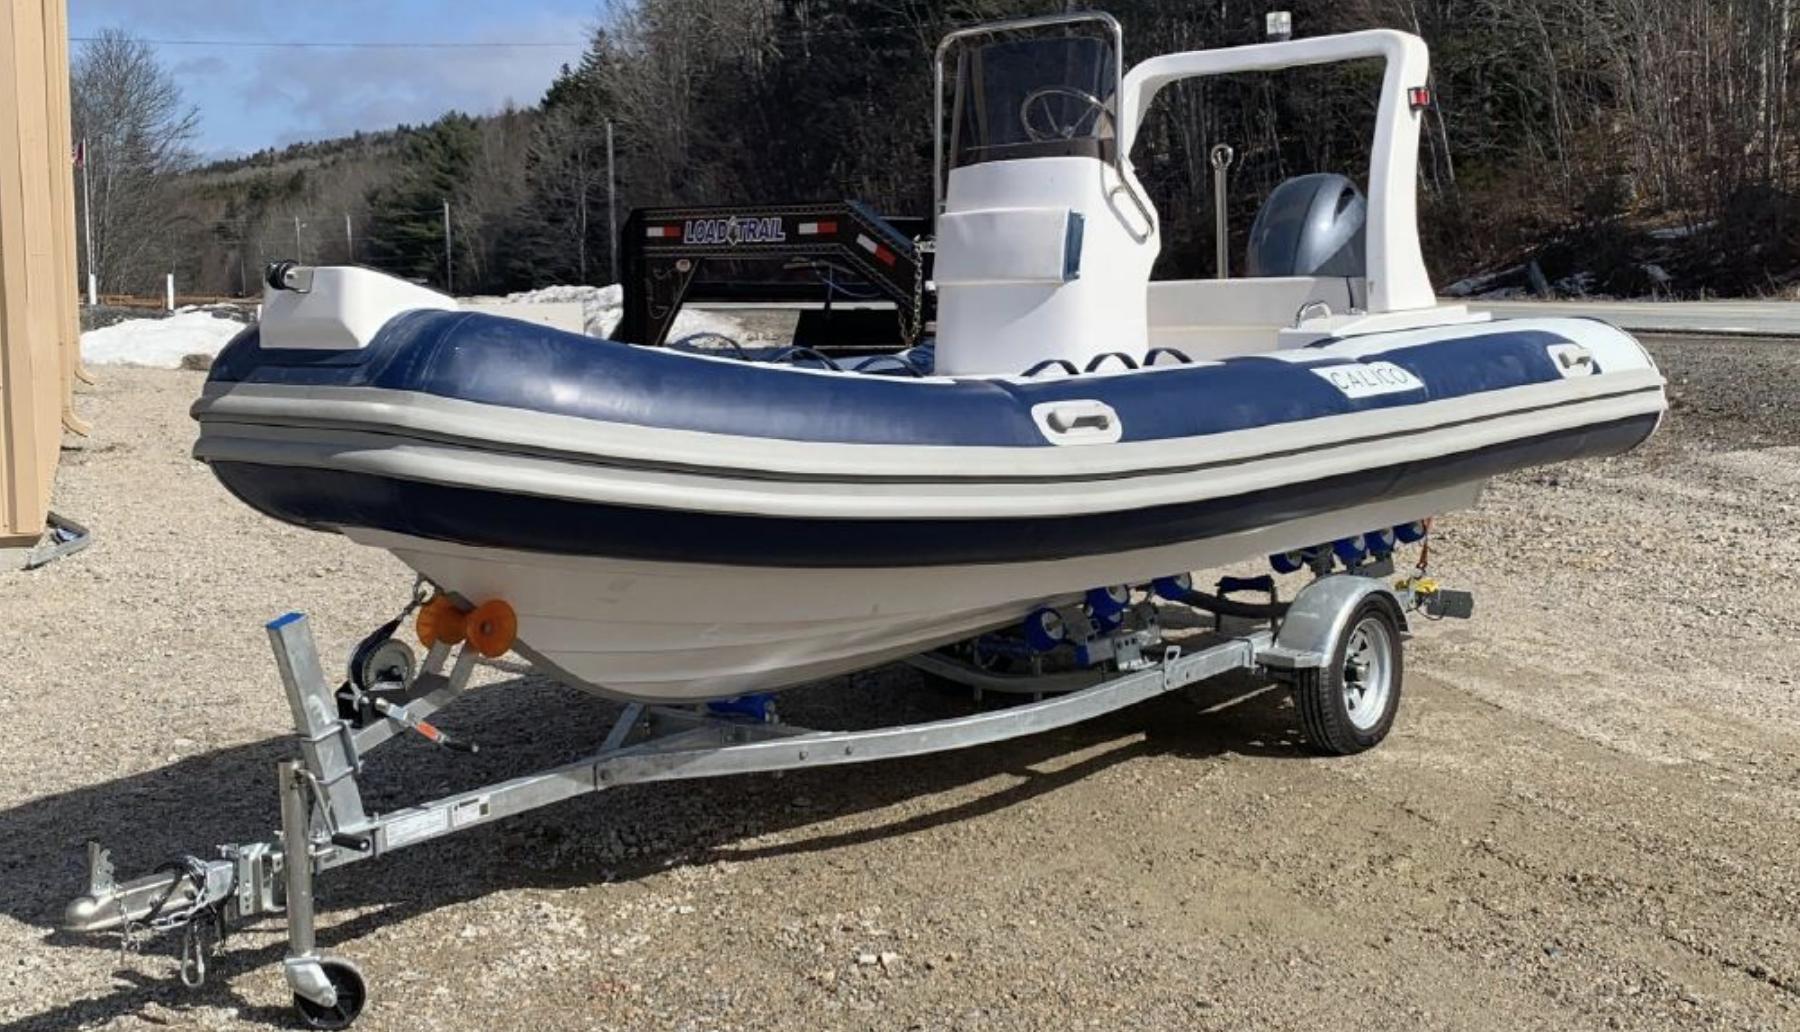 Buy Liya Rib 580 Aluminum Hull Inflatable Rib Boat Fishing Boats For Sale  at Best Price, Liya Rib 580 Aluminum Hull Inflatable Rib Boat Fishing Boats  For Sale Manufacturer and Exporter from Japan